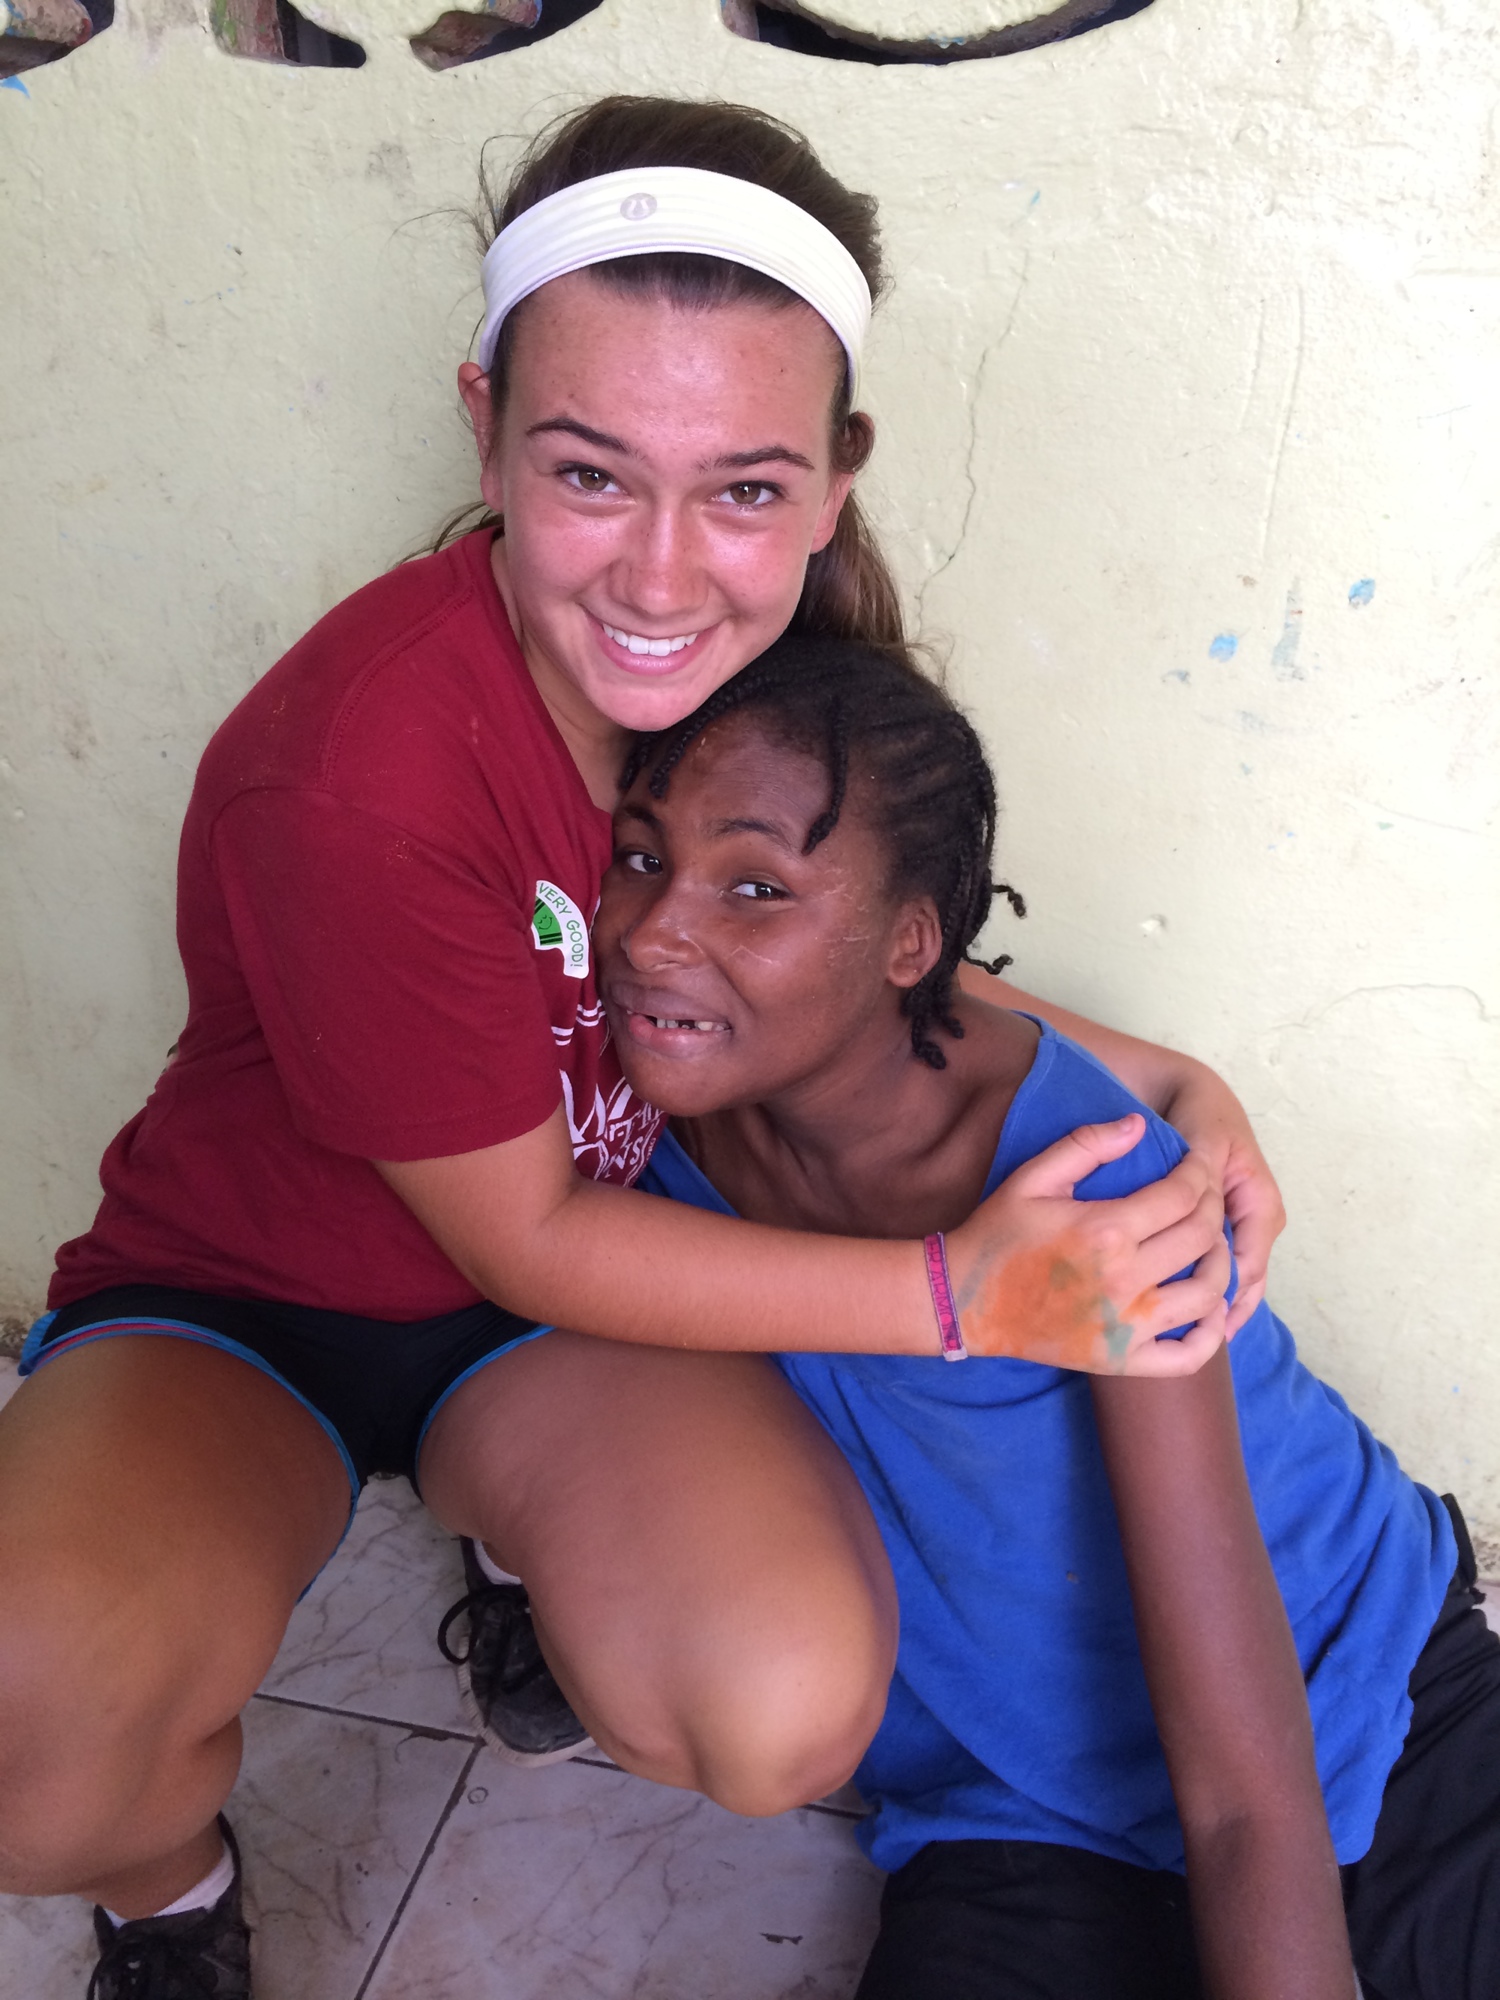 Cardinal Mooney grad and soccer player Isabella McDevitt and Carie pose at Carie's orphanage on the group's June 2015 trip. Courtesy photo.